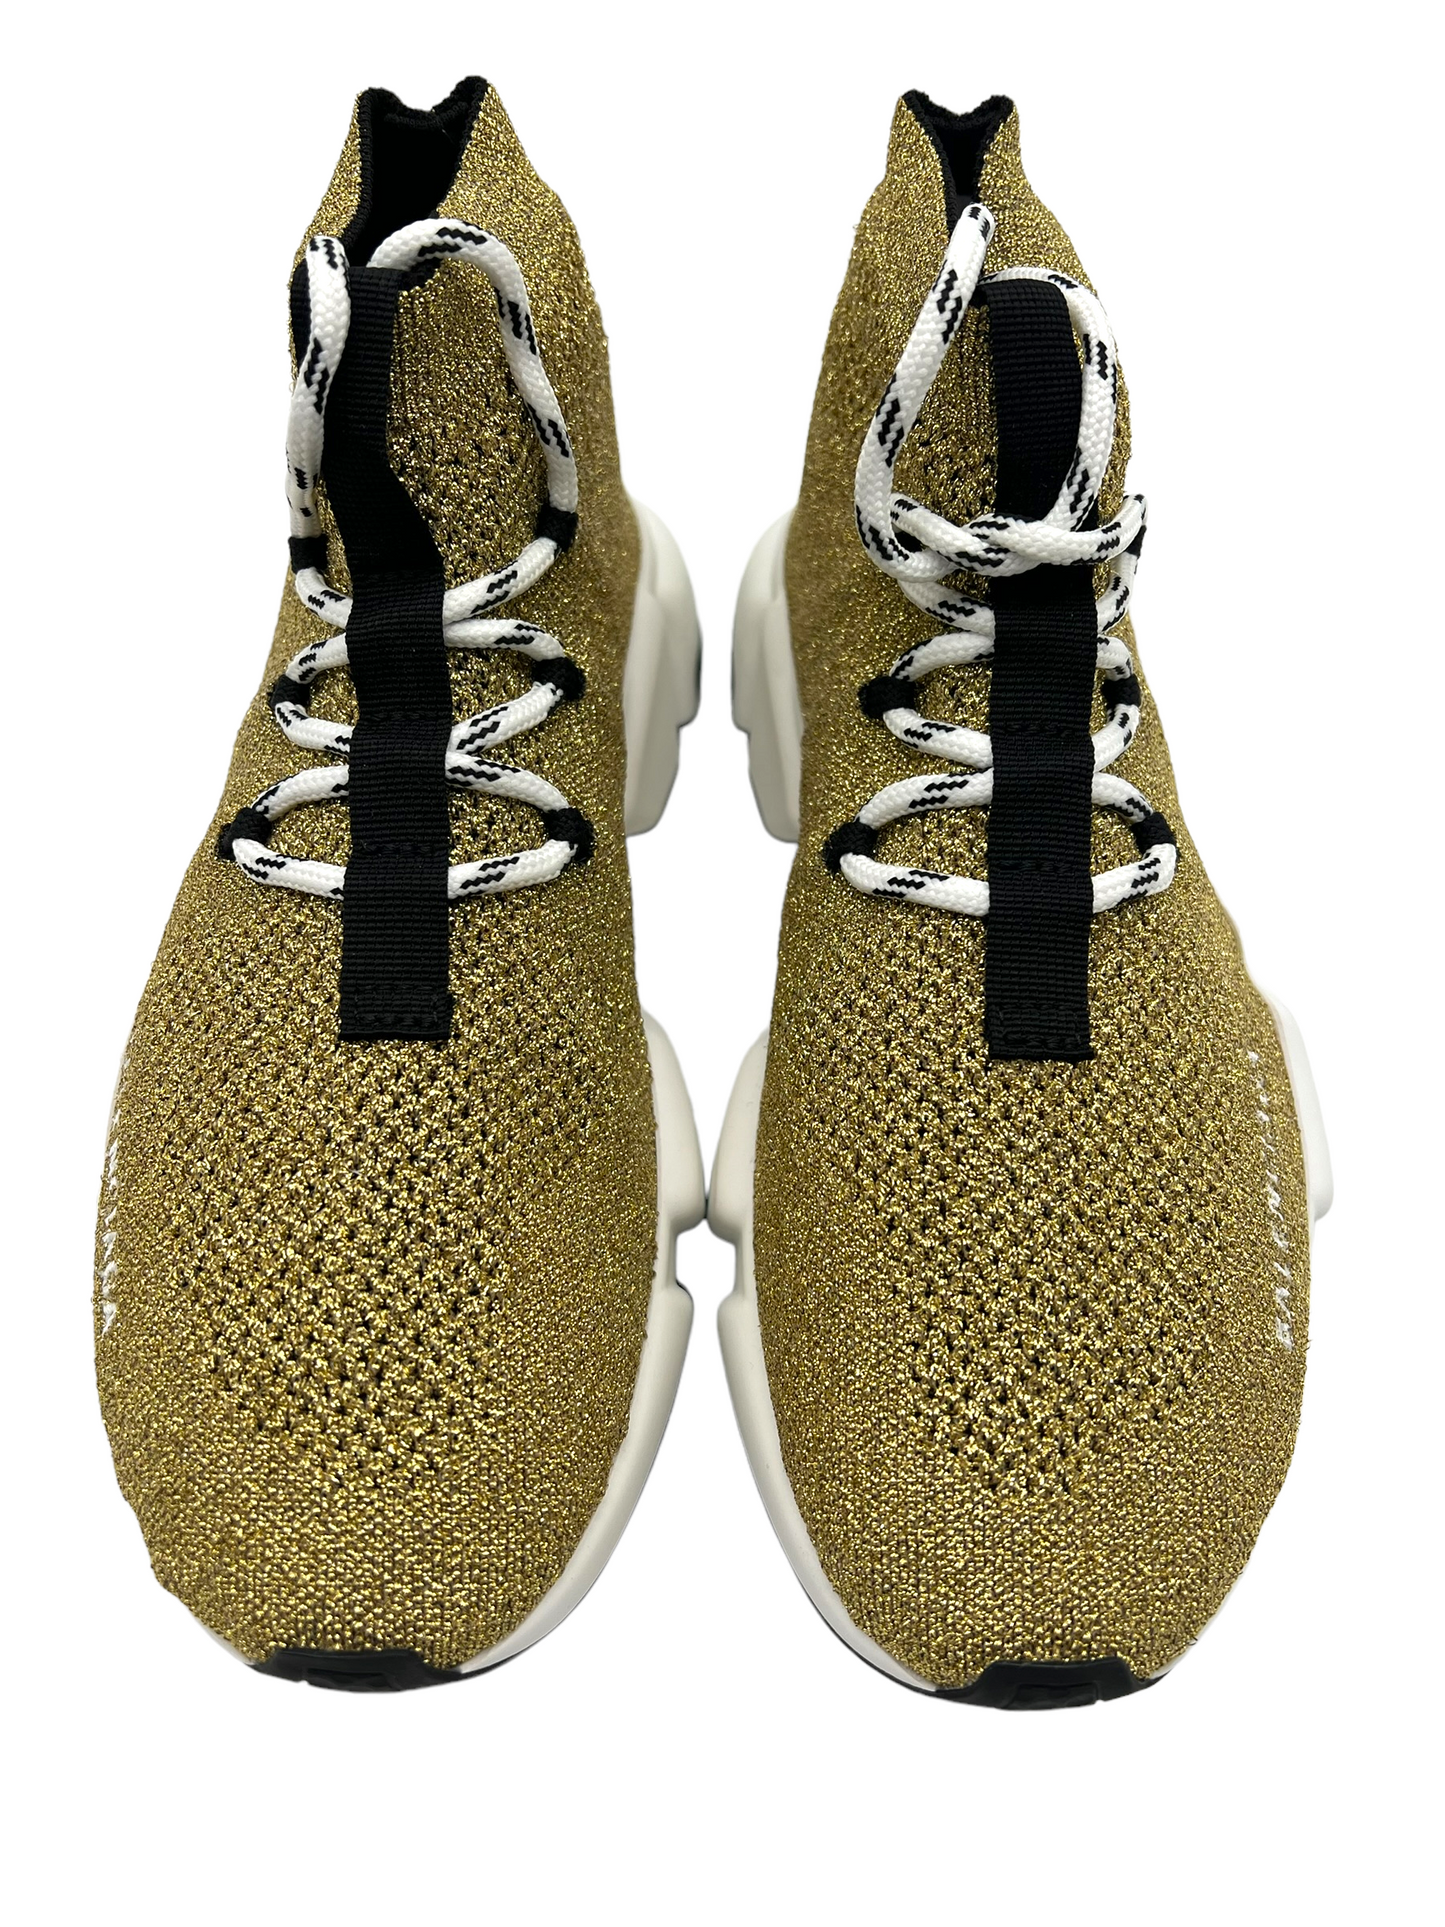 Balenciaga Gold Metallic Knit Lace Up Size 8 Speed Trainer Sneakers